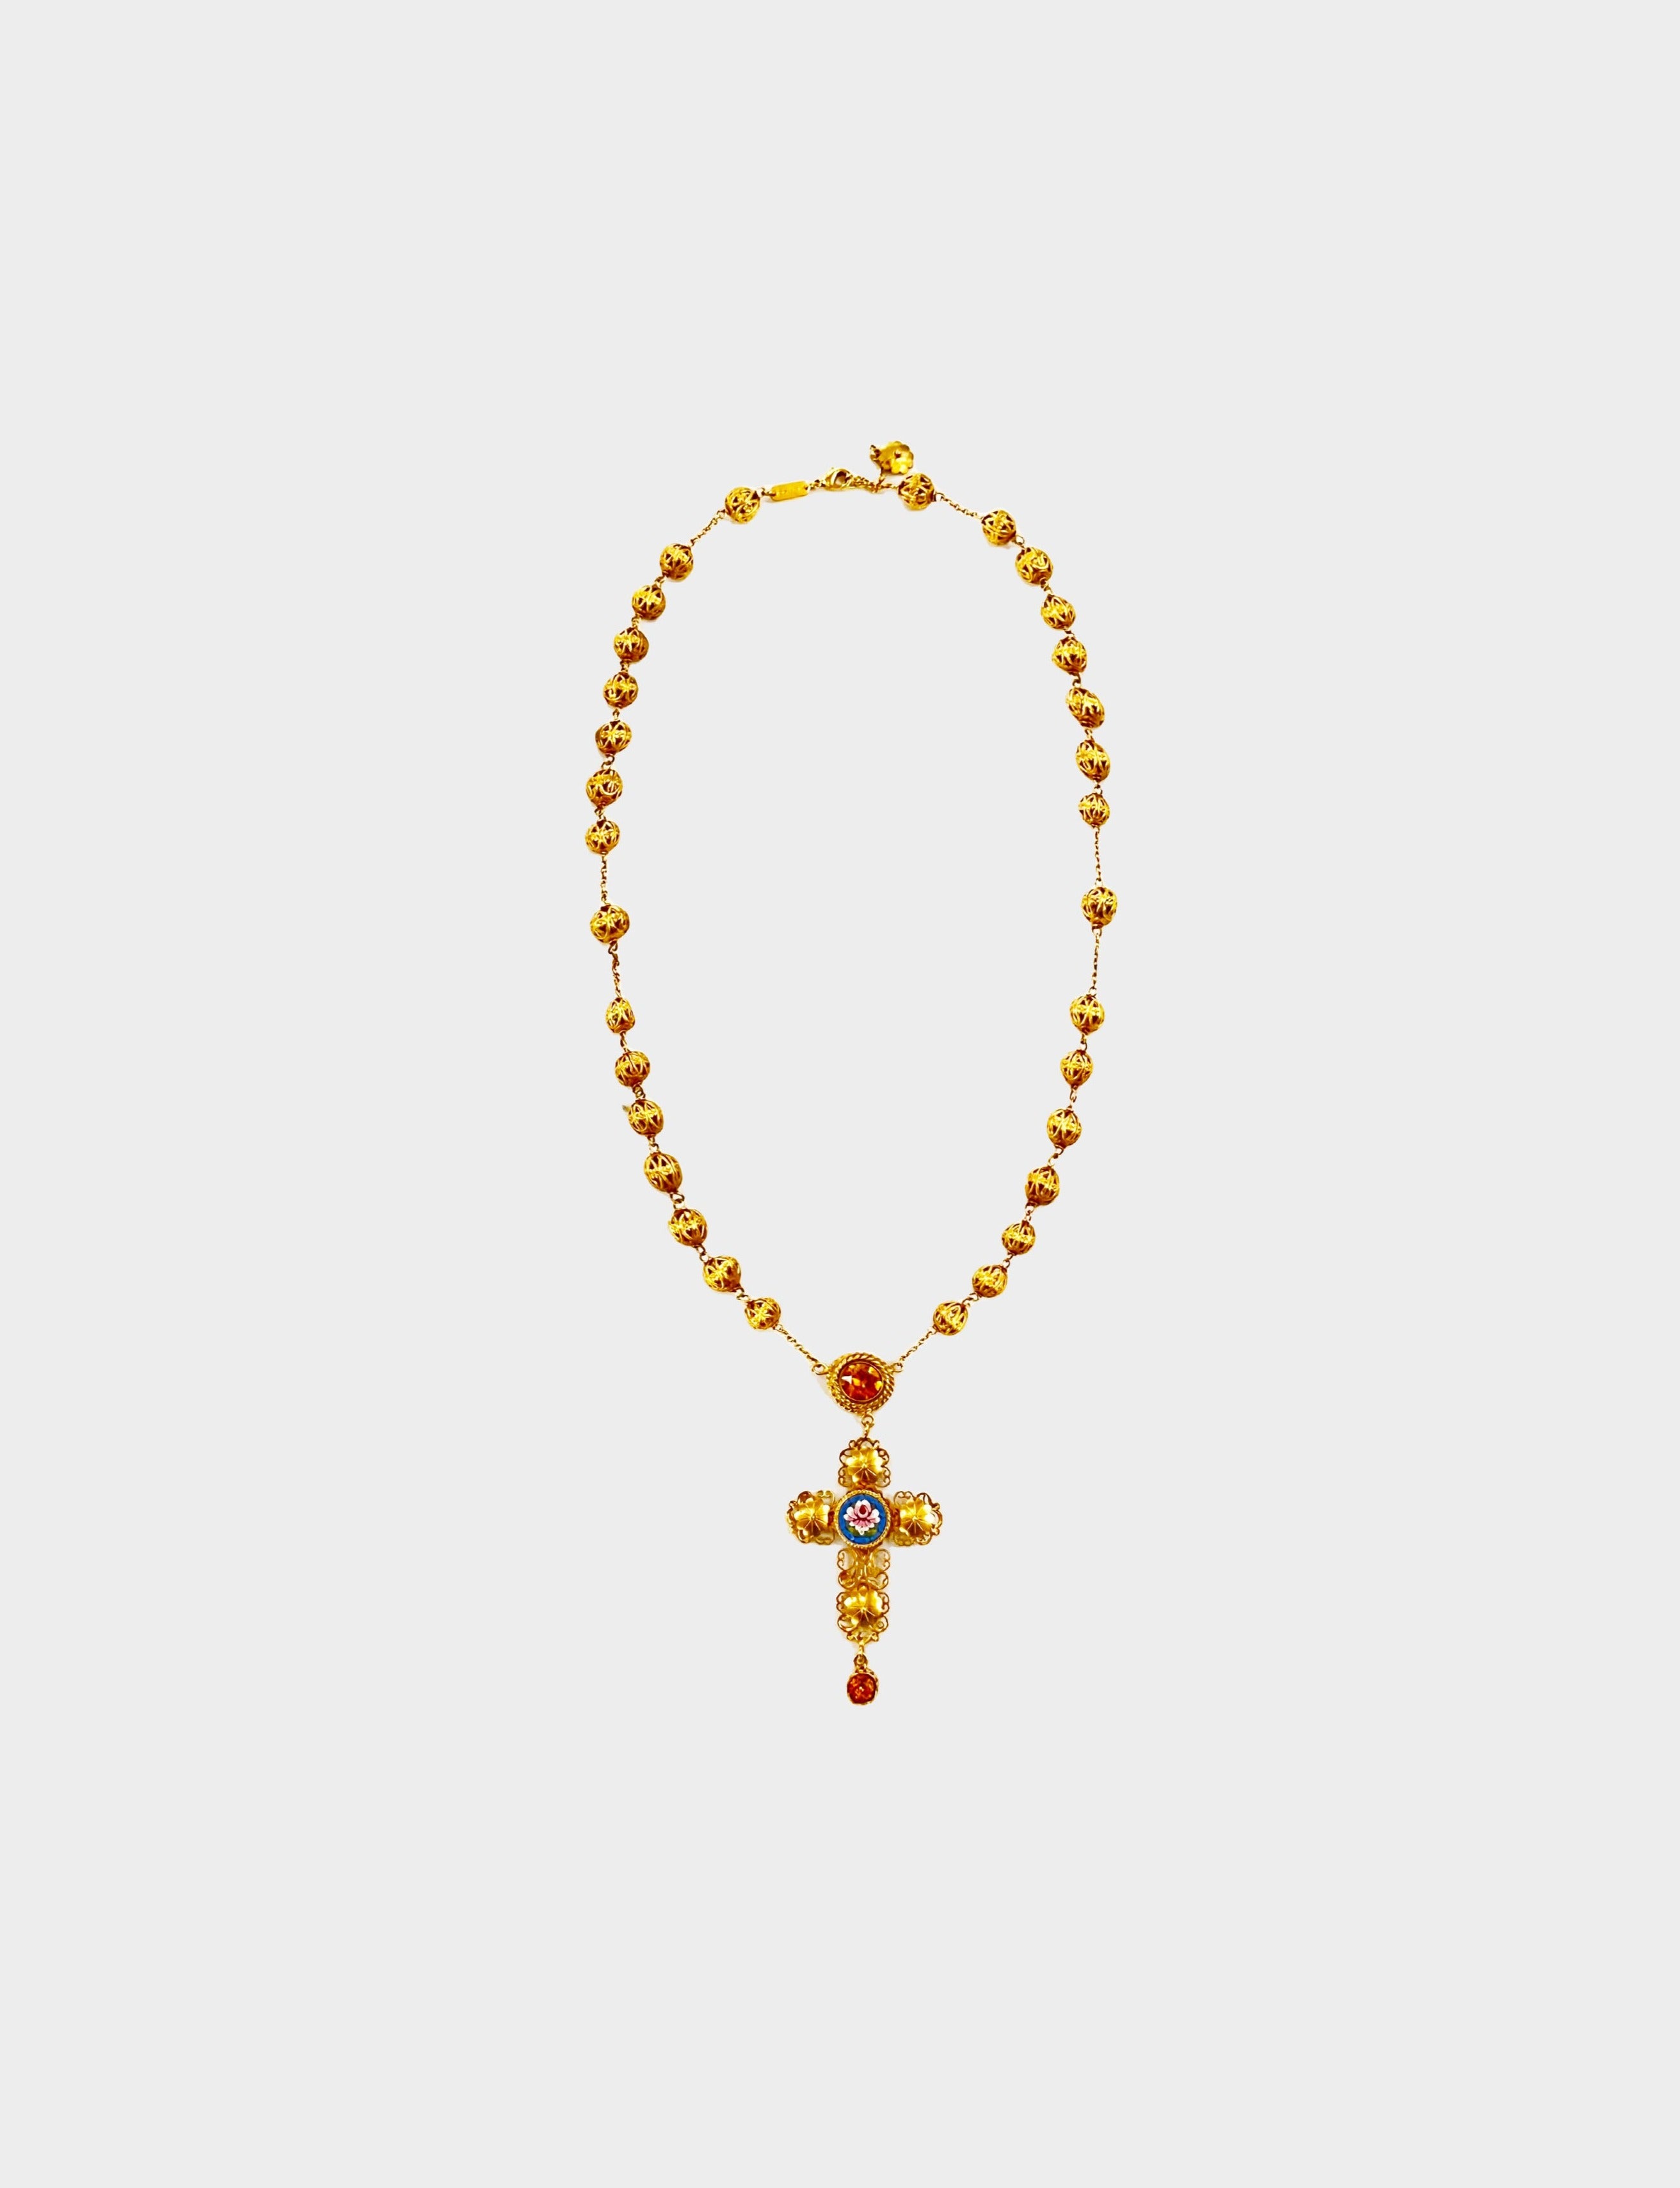 Dolce and Gabbana 1990s Gold Embellished Cross Necklace